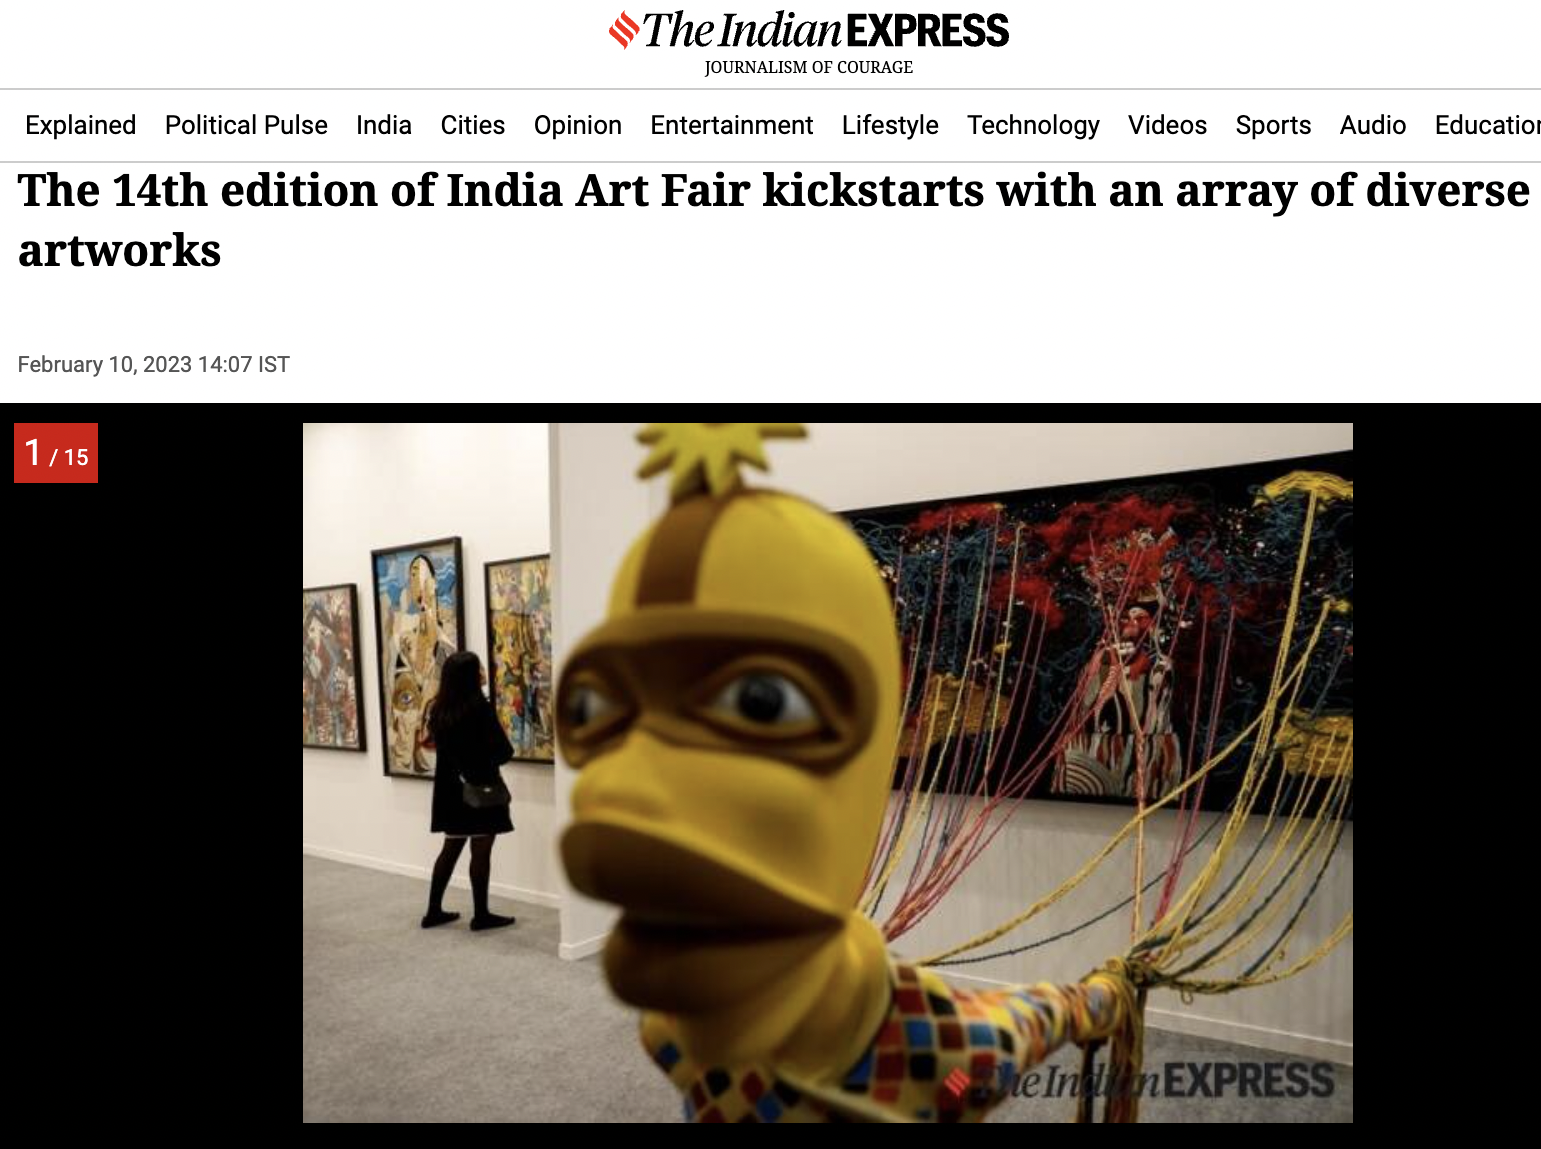 Ineffable - The Indian Express